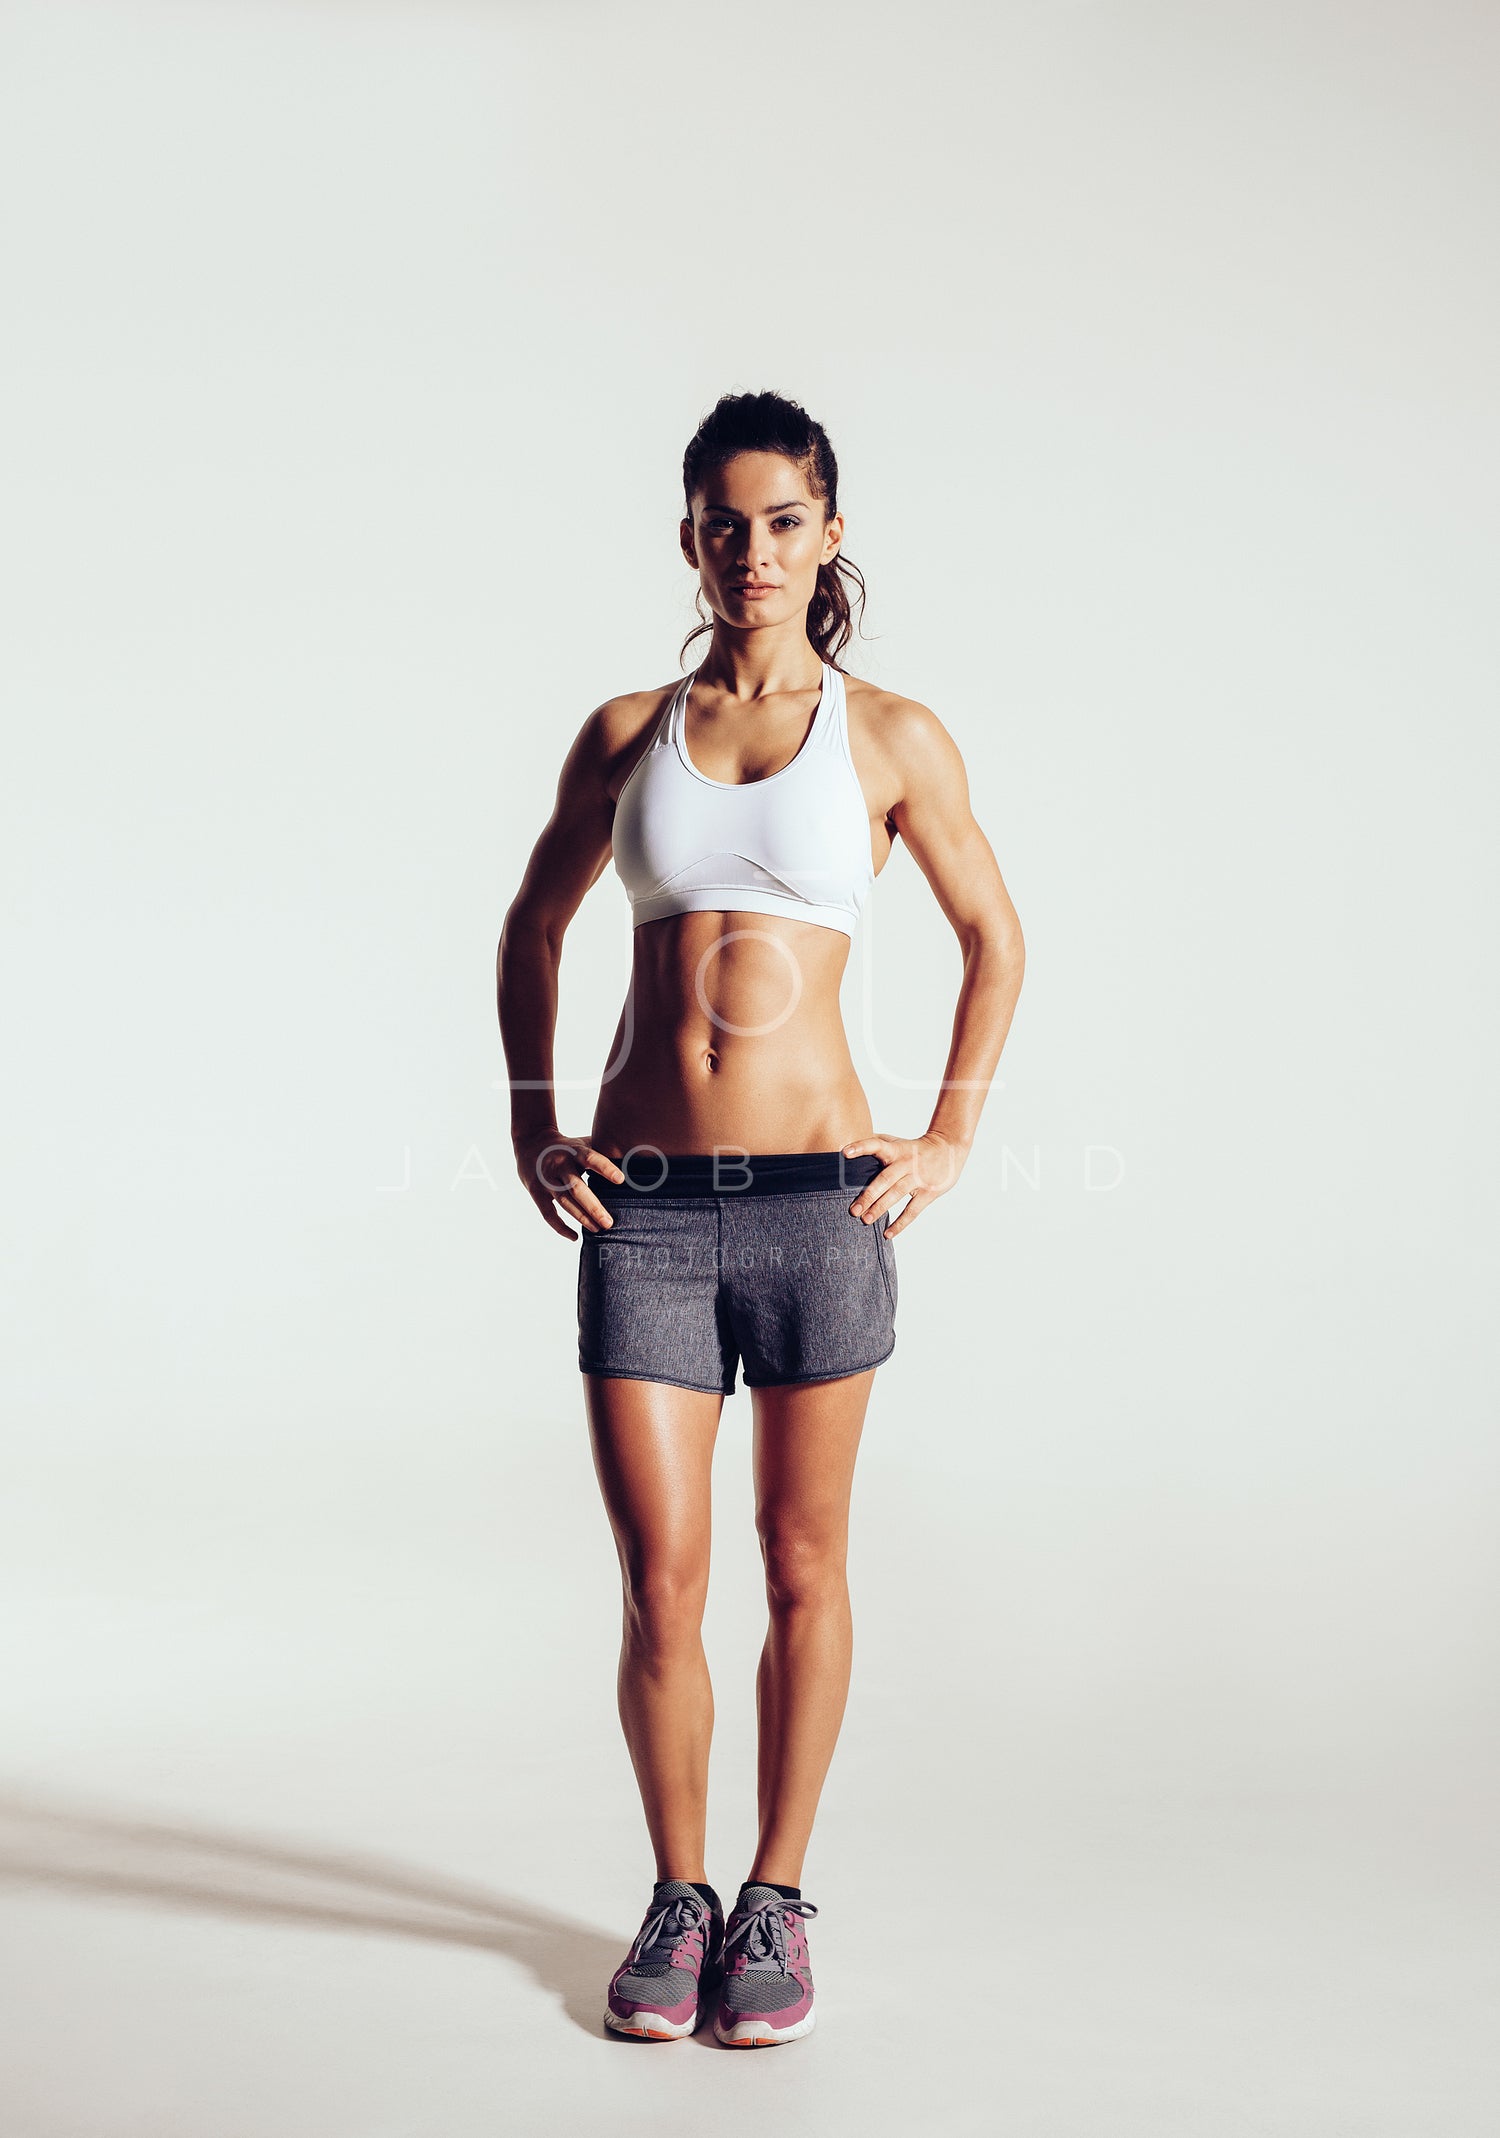 Beautiful fit girl in sport bra and shorts stock photo containing sport and